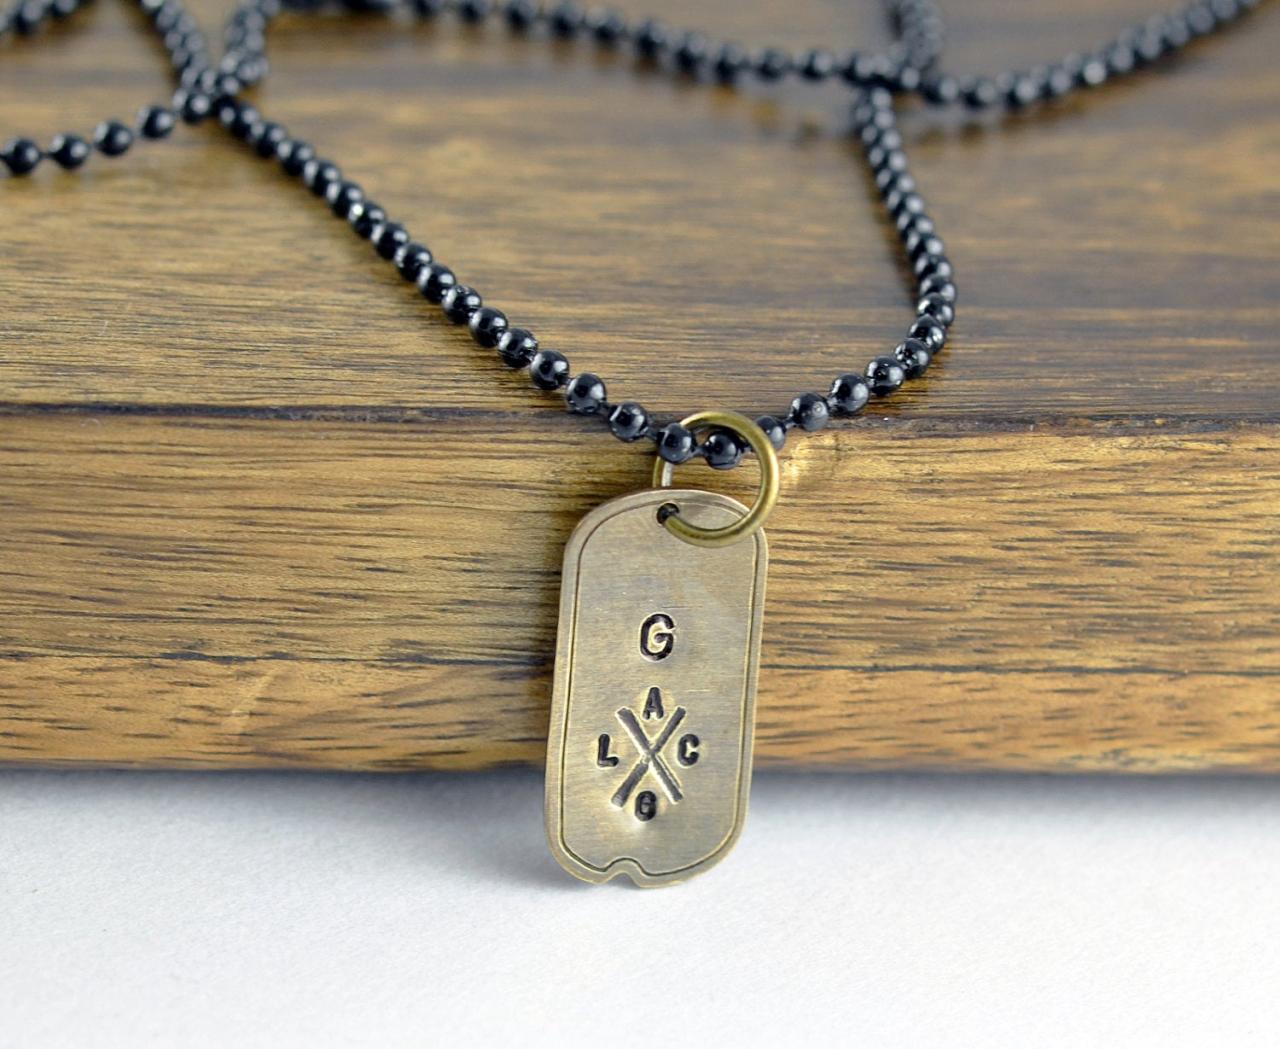 Mens Dog Tag Necklace - Hand Stamped Tag Necklace - Personalized Mens Necklace - Mens Necklace - Mens Jewelry - Boyfriend Gift - Mens Gift